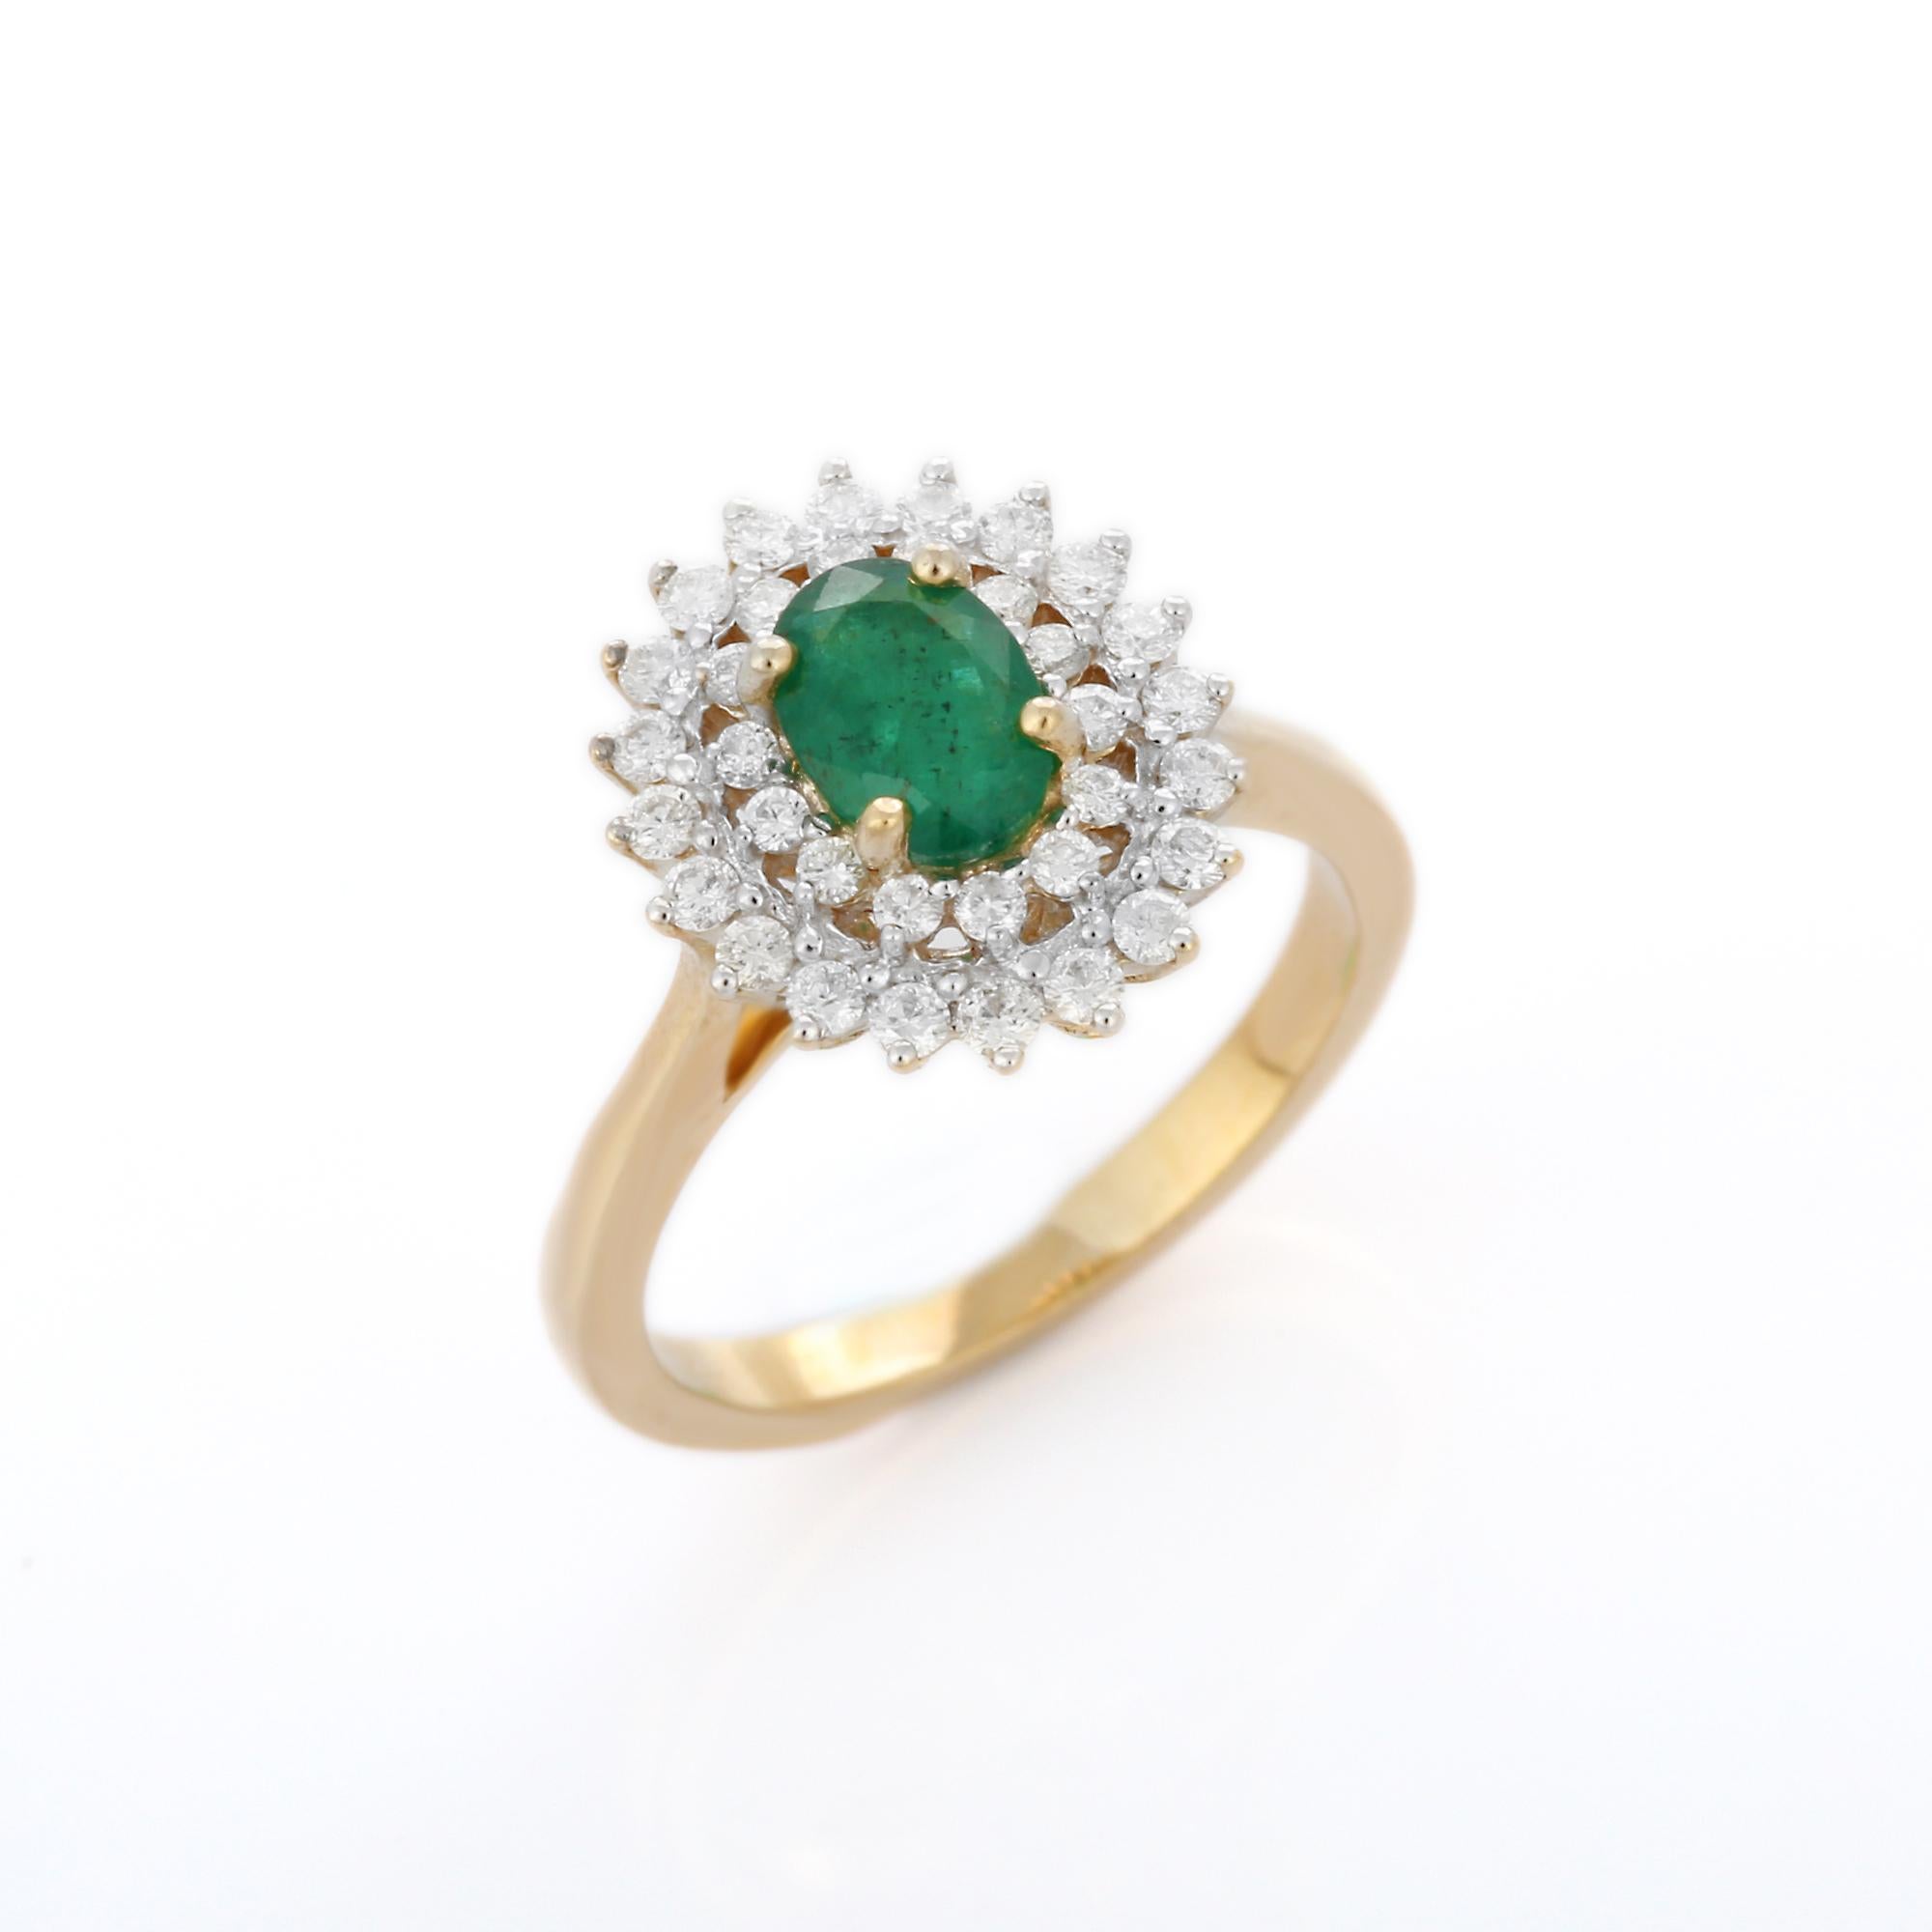 For Sale:  14K Yellow Gold Designer Oval Cut Emerald Ring Mounted with Layers of Diamonds 2